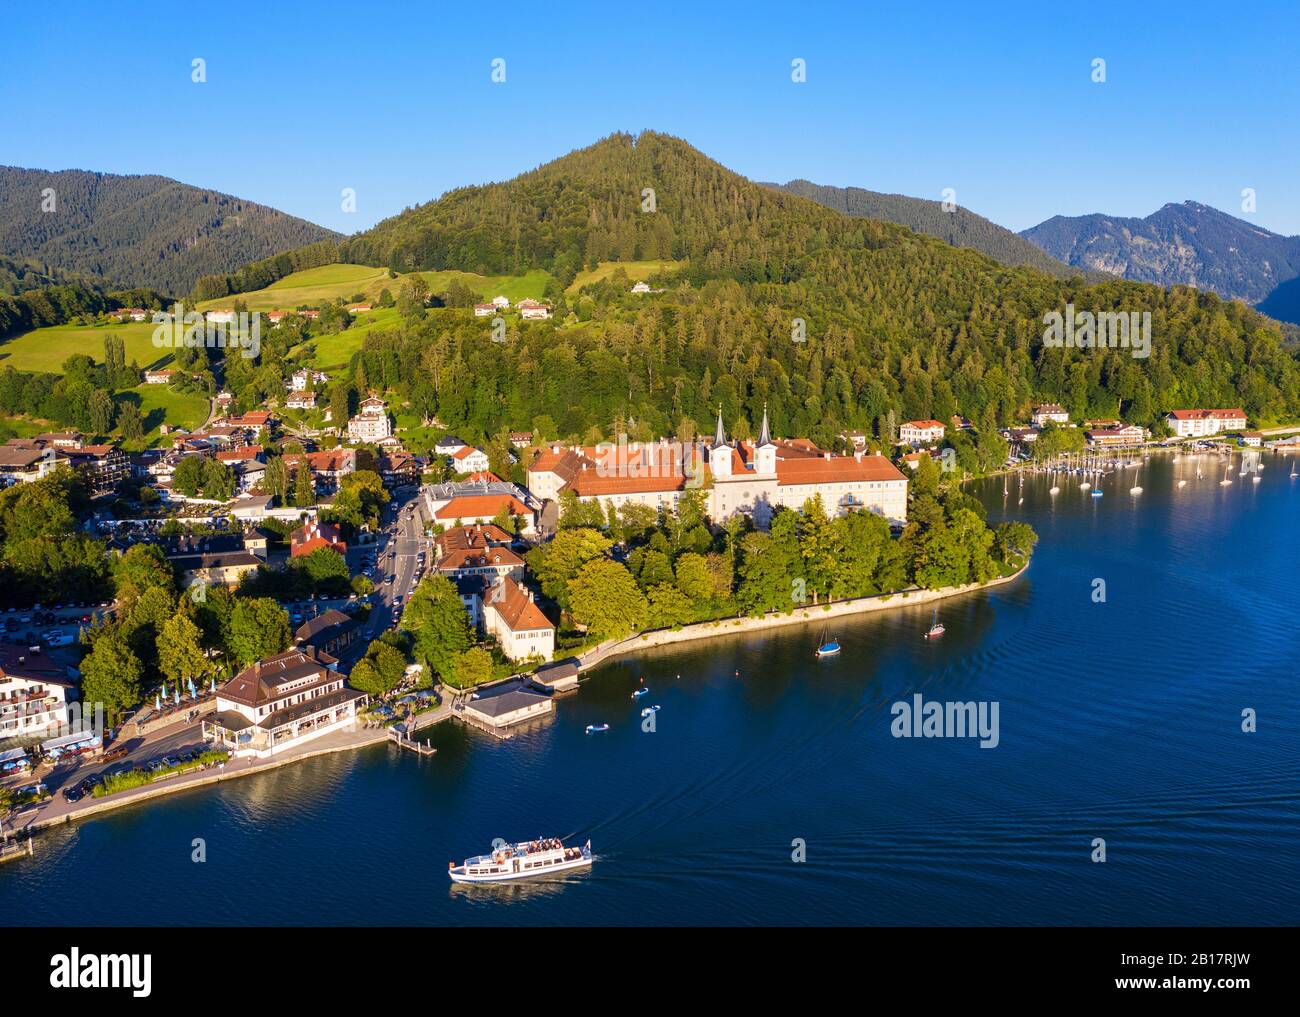 Germany, Bavaria, Tegernsee, Aerial view of Tegernsee Abbey Stock Photo